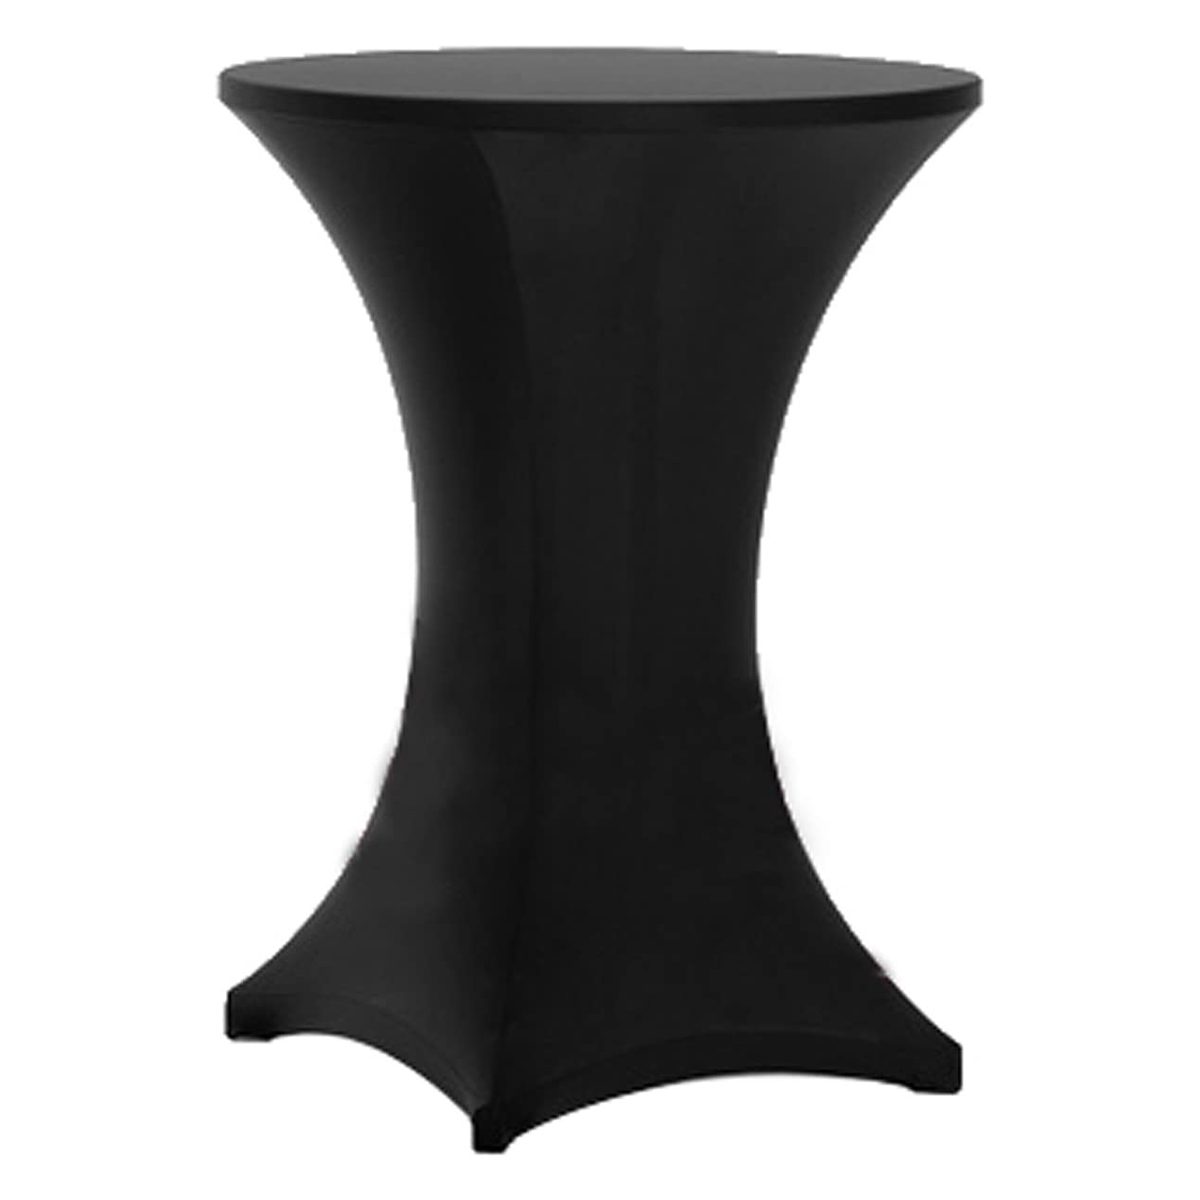 42 (inch tall) 30 (inch round) Wood Cocktail Tall Table with Spandex Table Cover